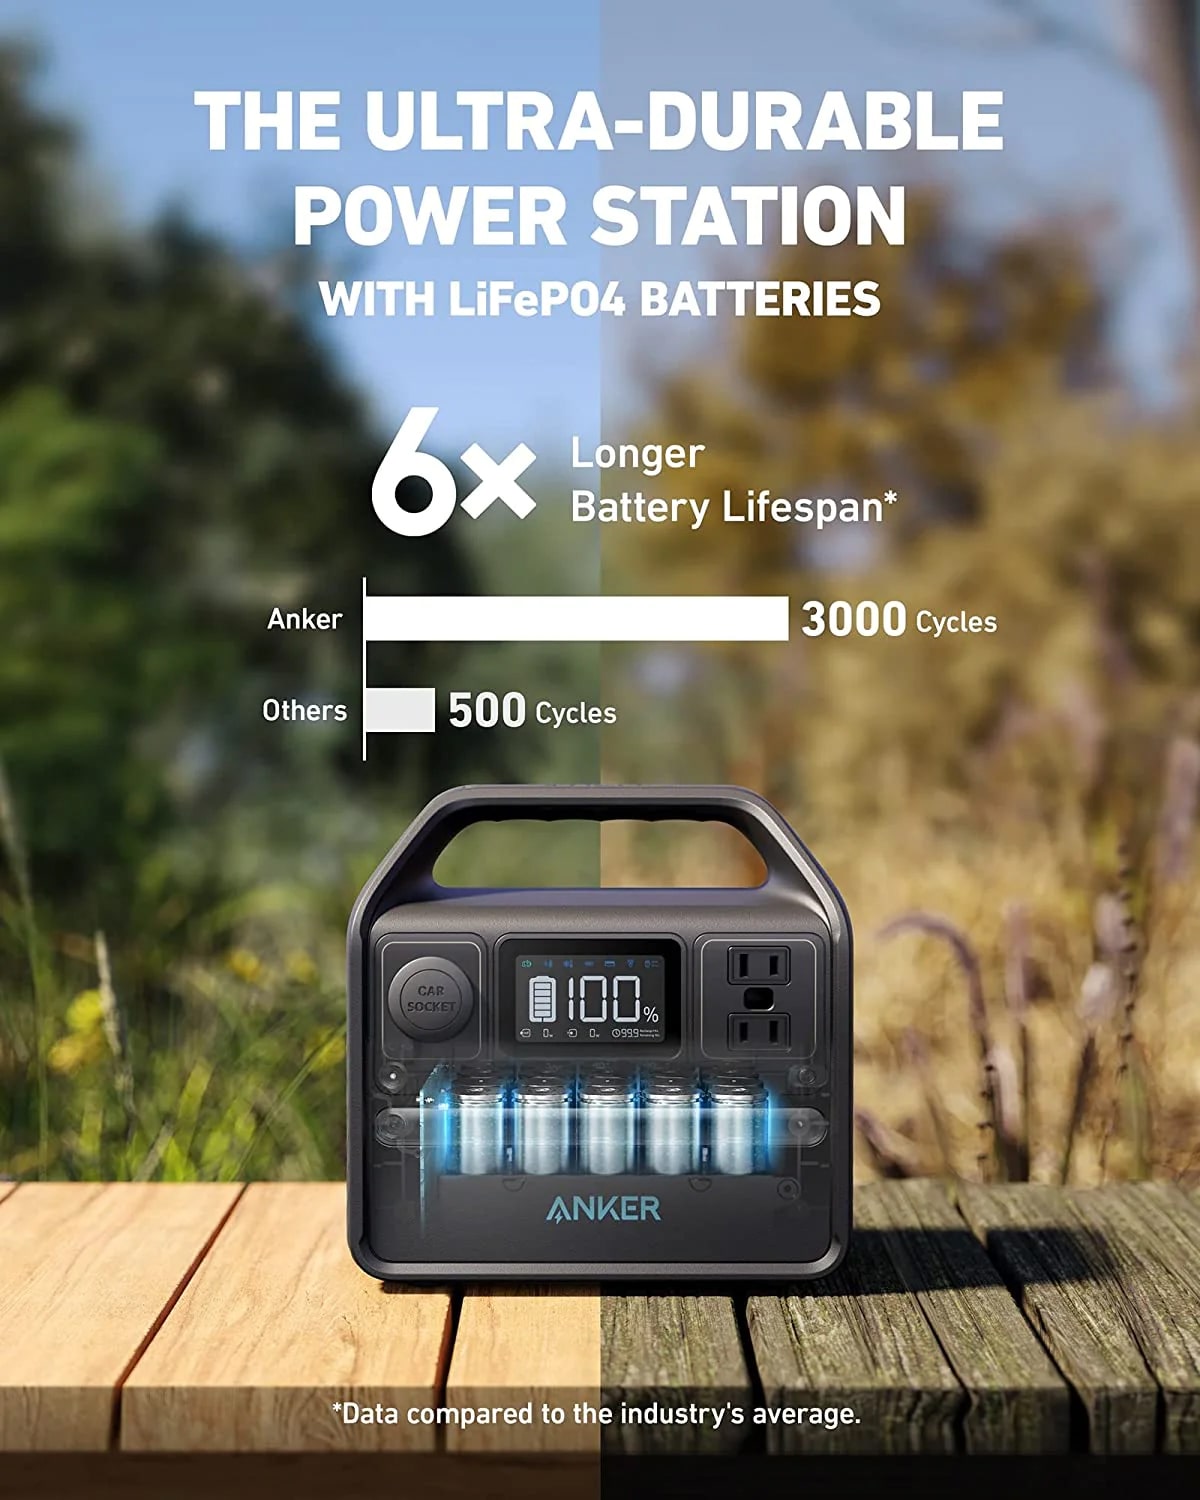 The Anker 521 Is An Ultra-Durable Power Station